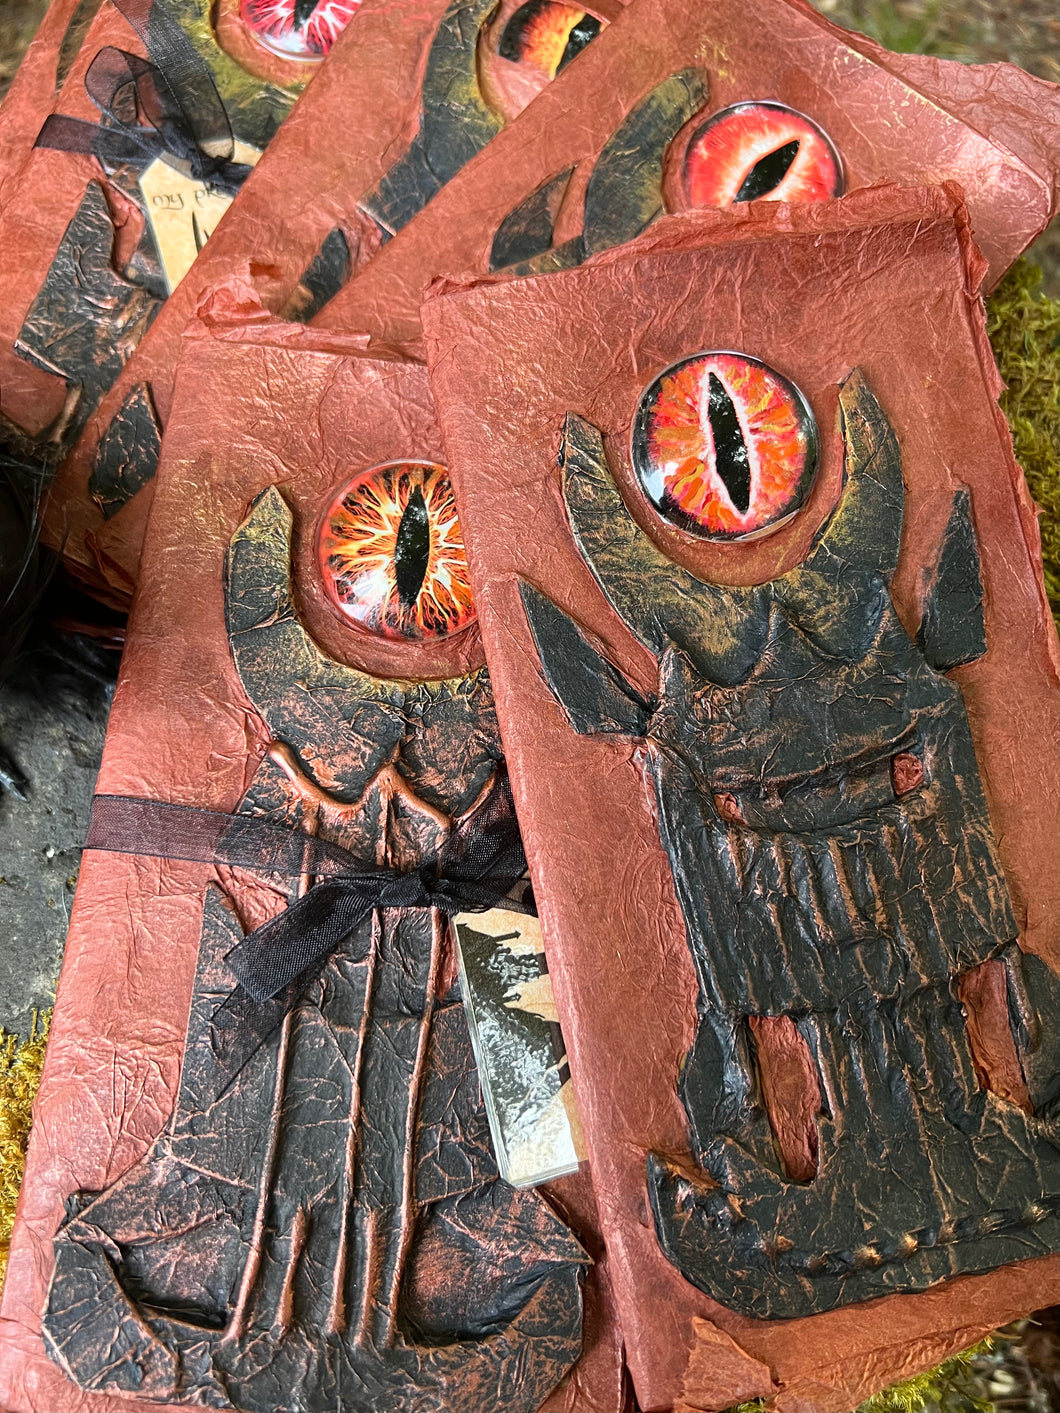 Handmade rust-colored notebook with a unique black tower design, featuring a prominent red glass eye reminiscent of Sauron from LOTR. 